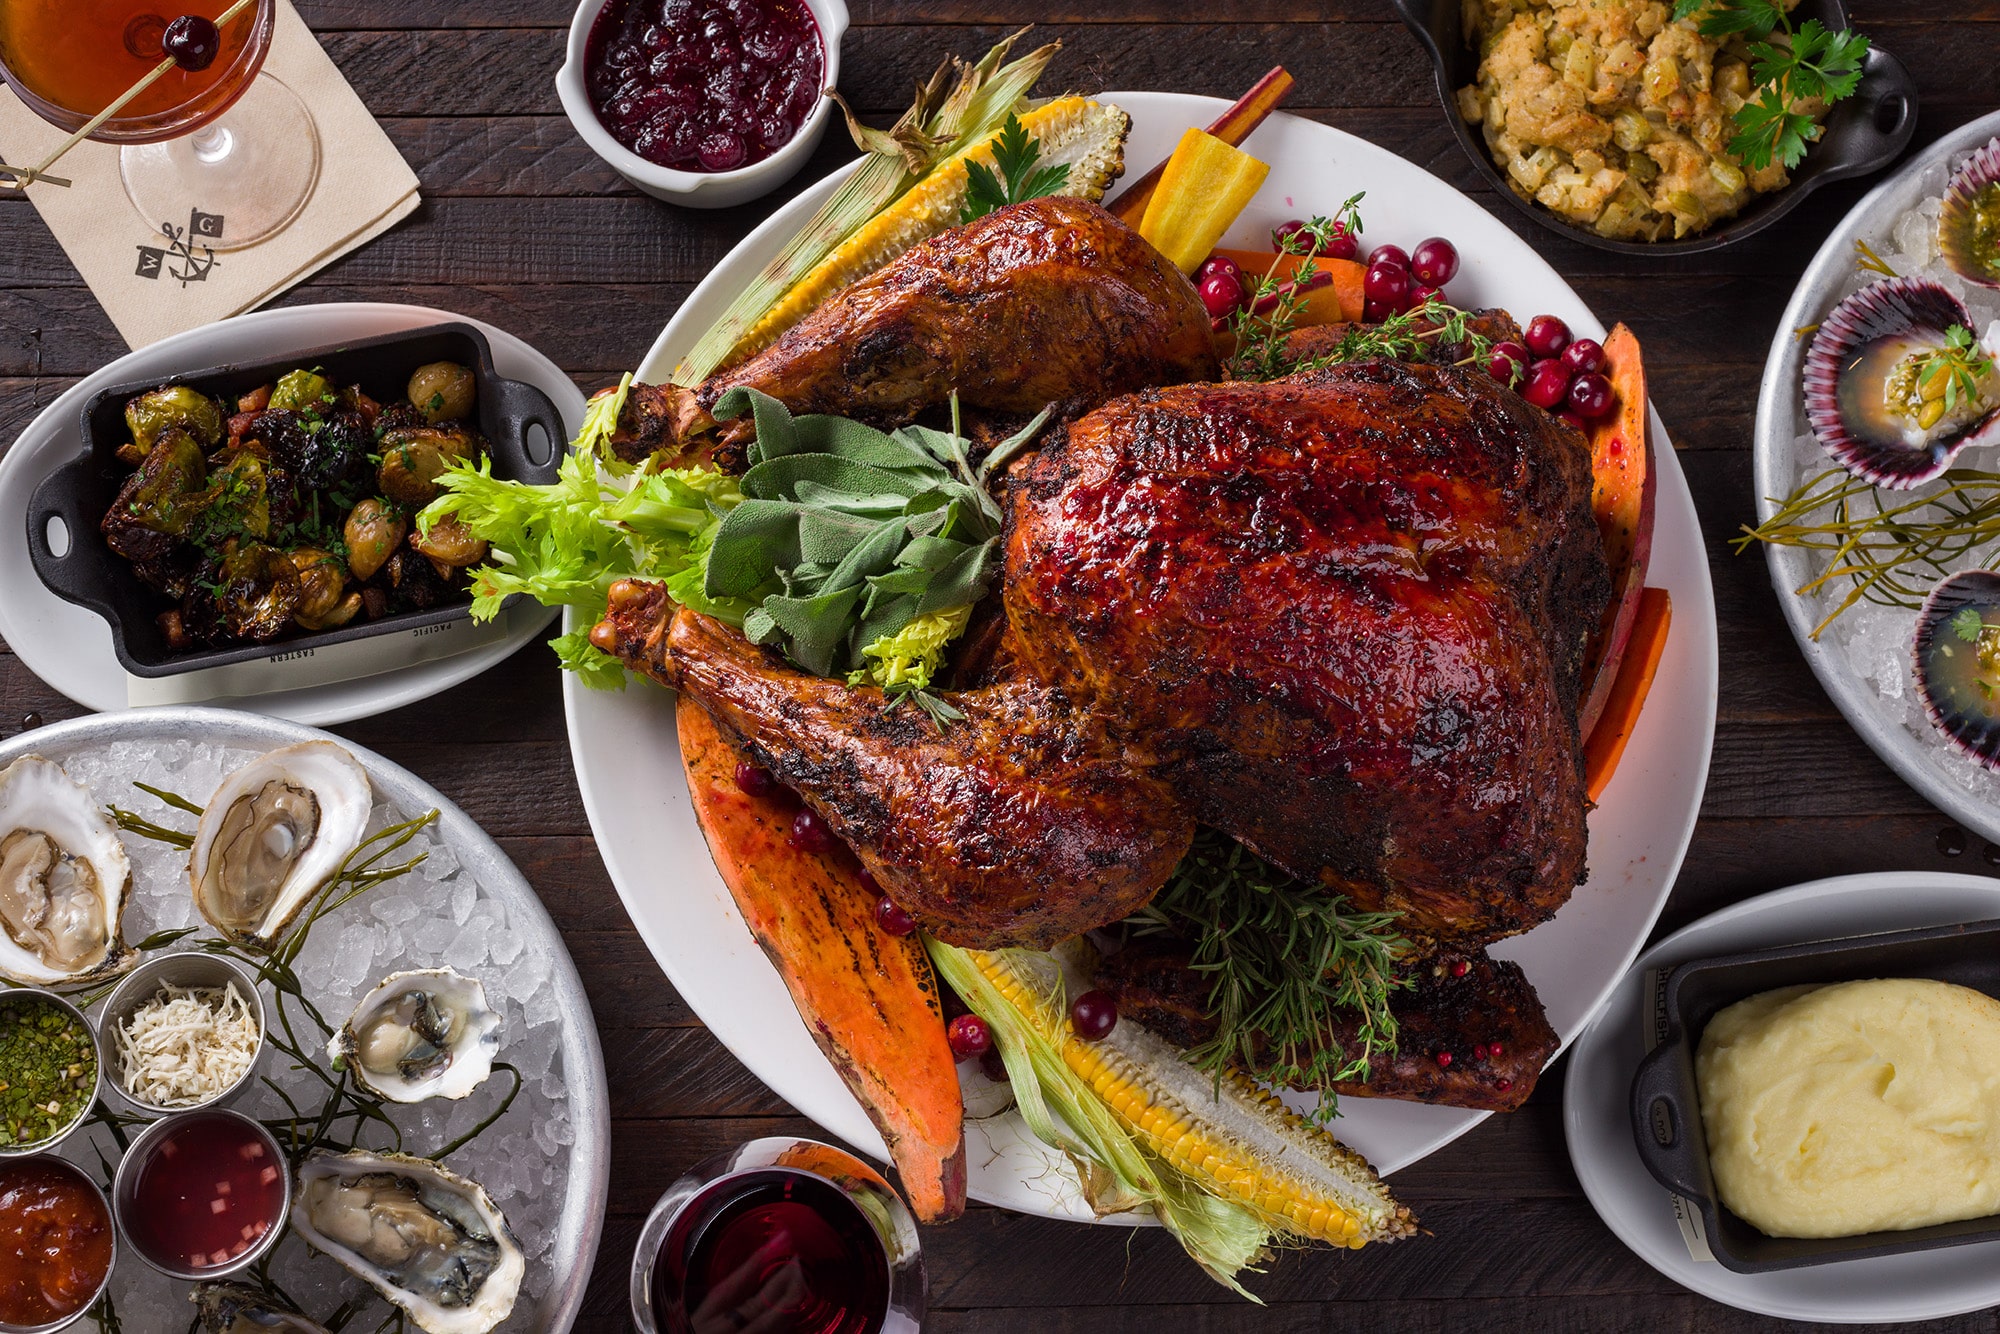 Water Grill is offering a 3-course, pre-fixe menu full of elevated versions of traditional holiday offerings.